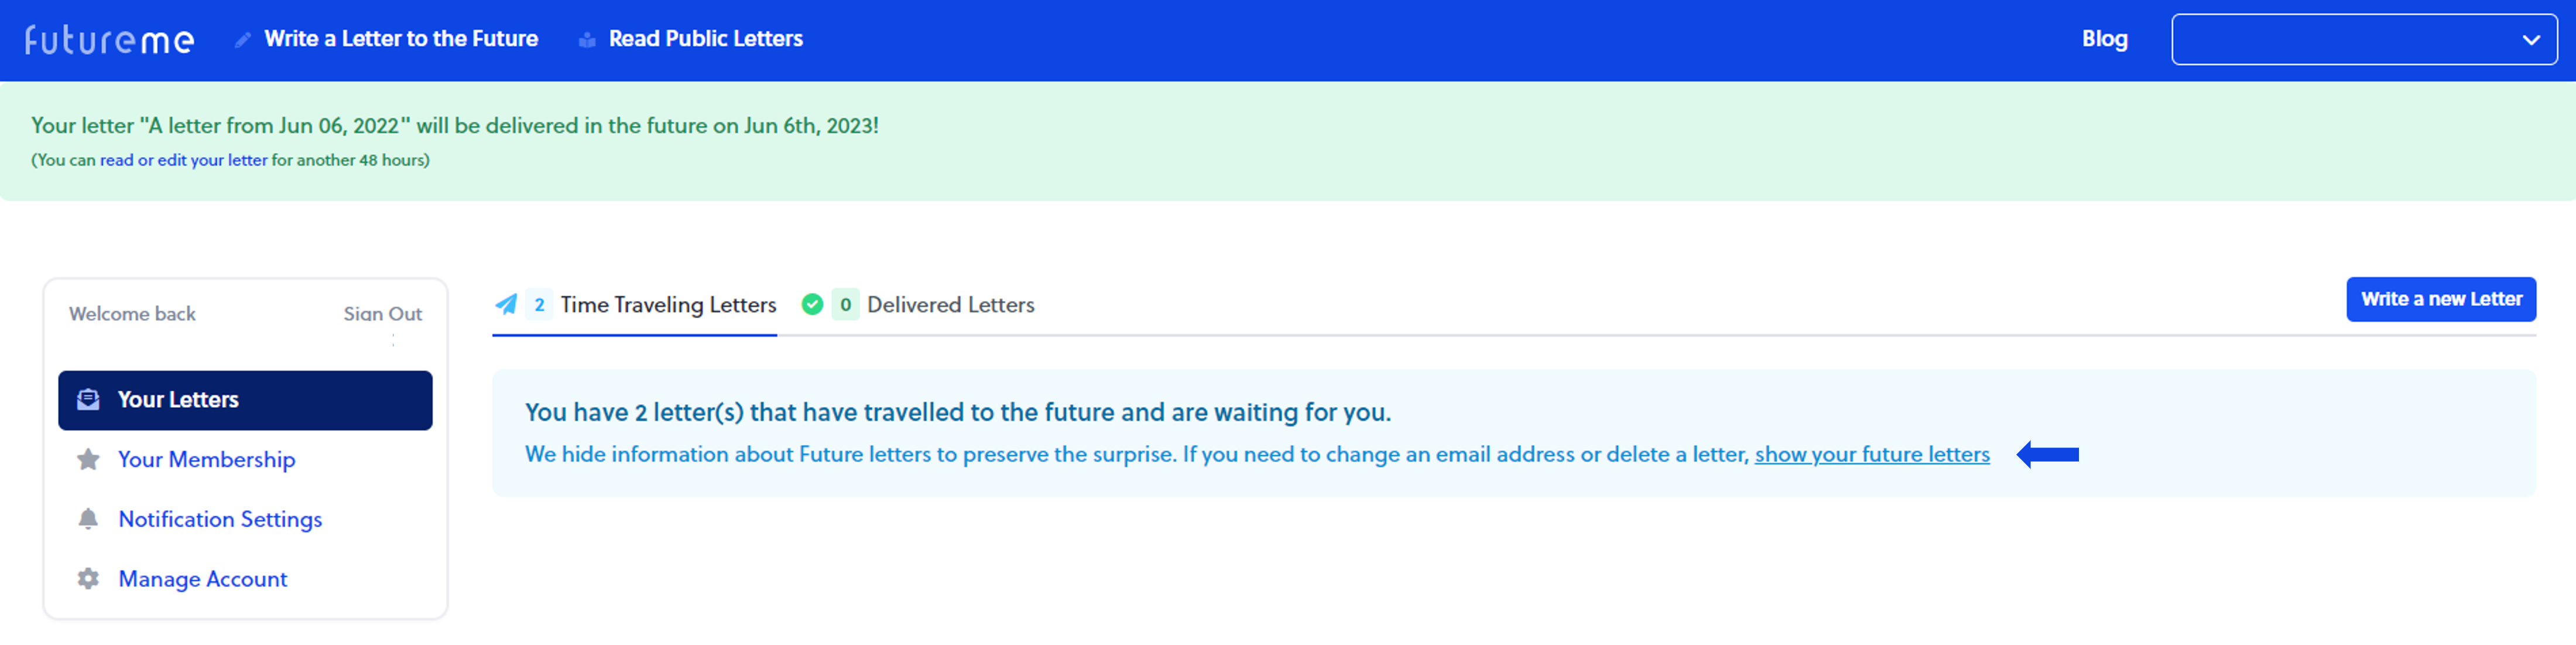 Show_your_future_letters.png